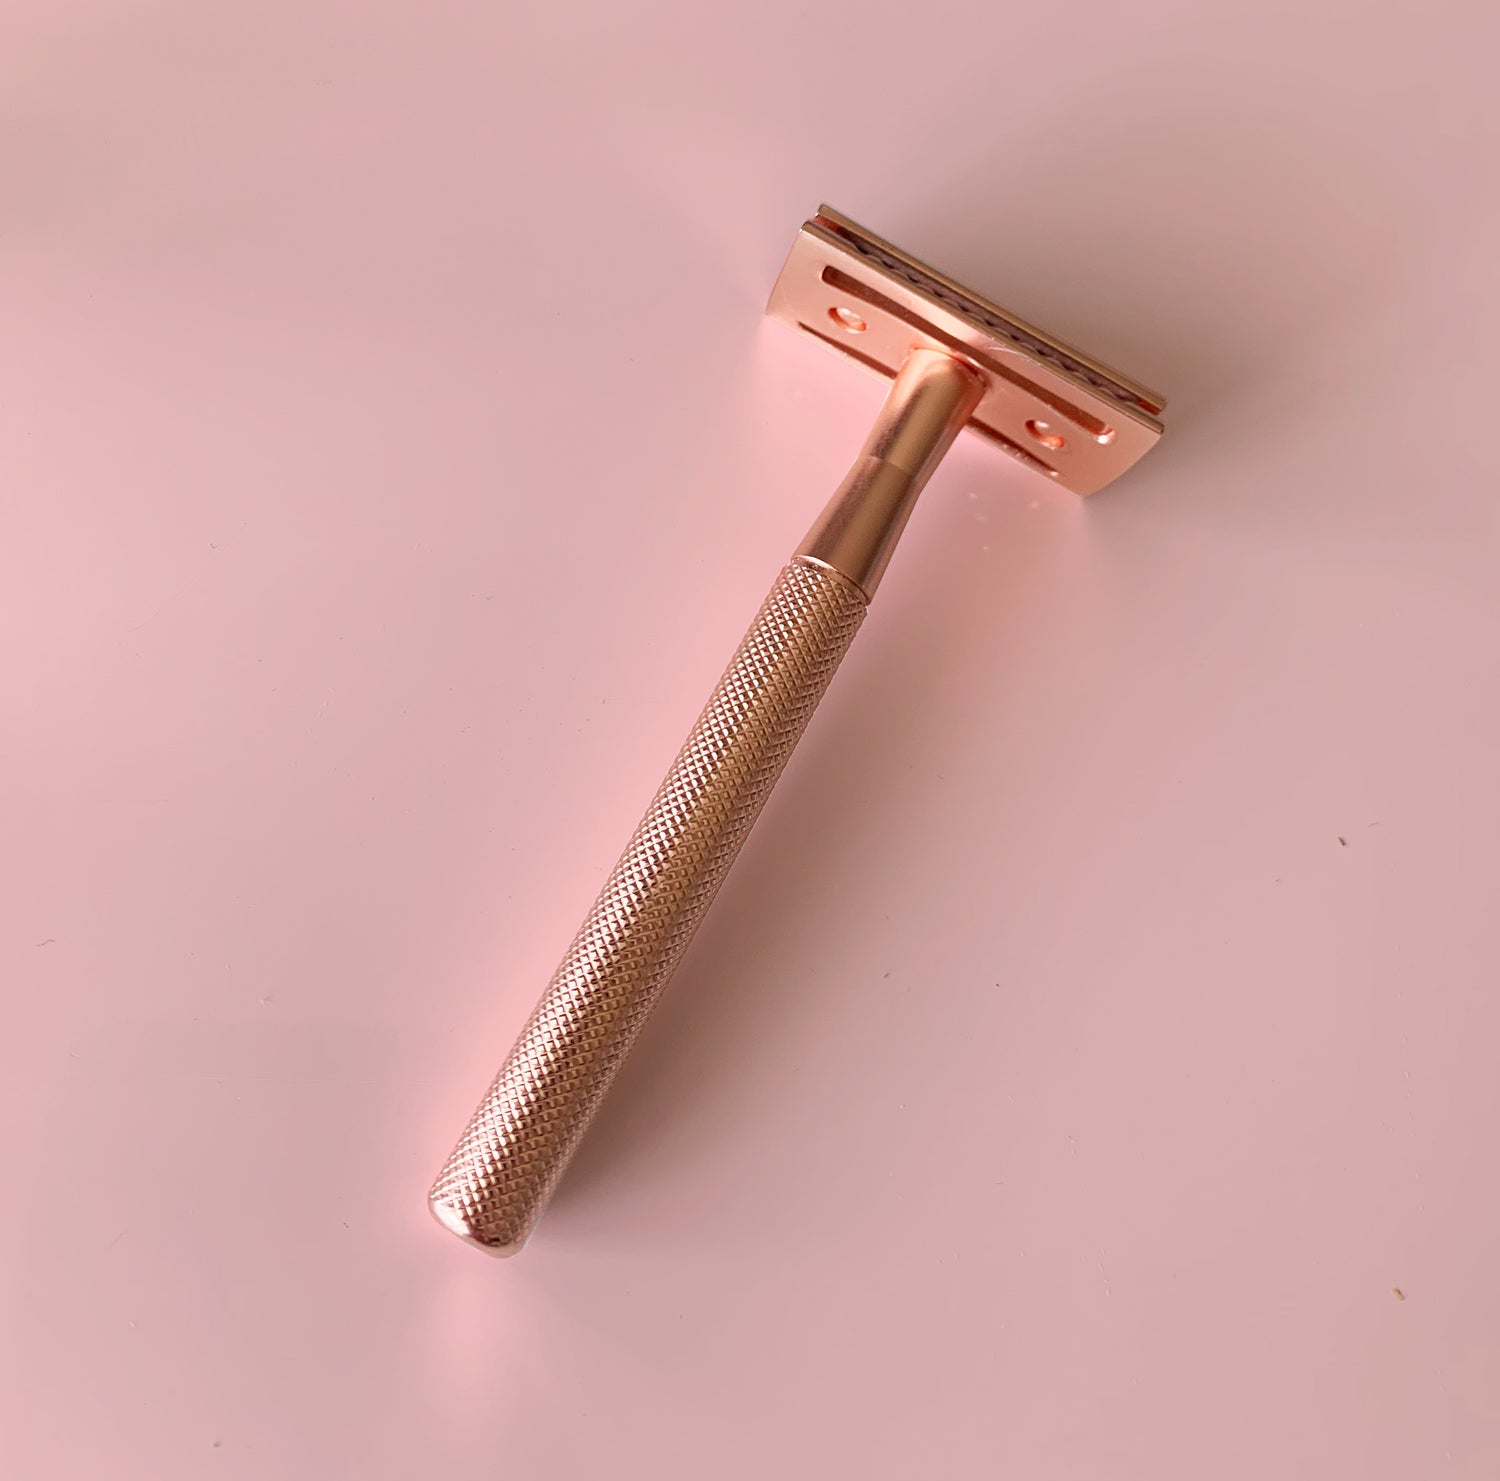 How to Assemble a Safety Razor